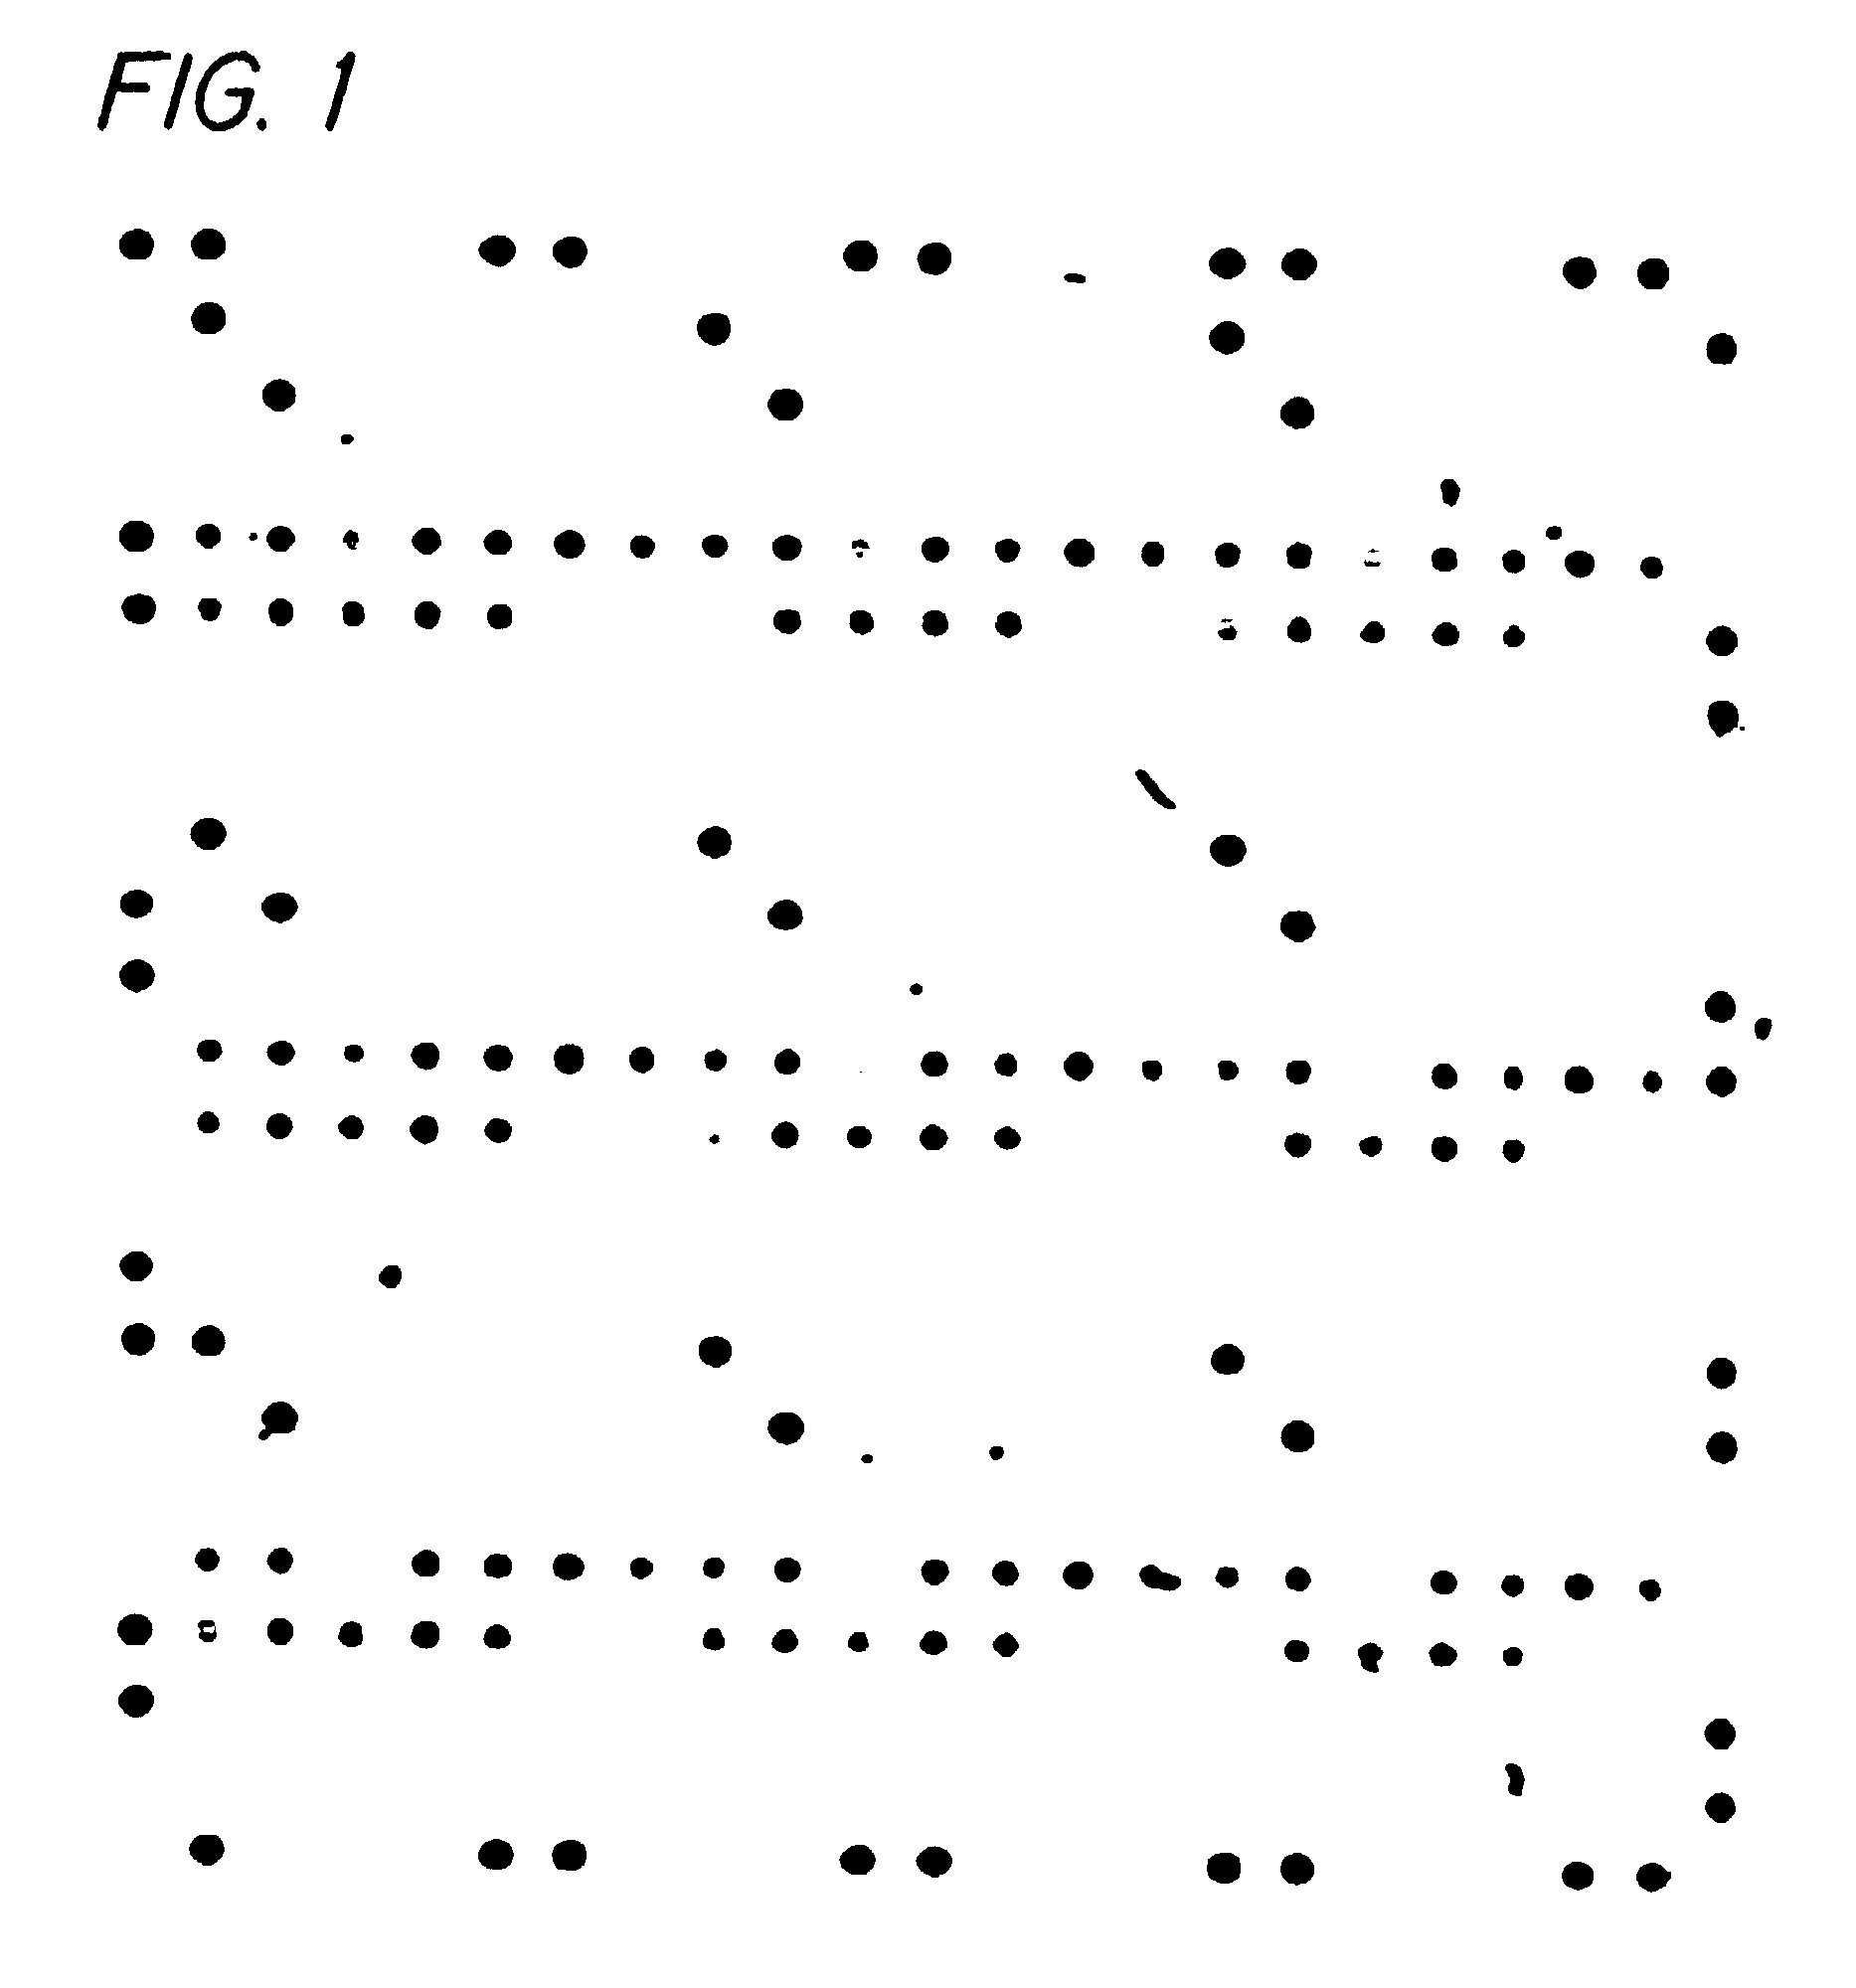 Method of extracting locations of nucleic acid array features